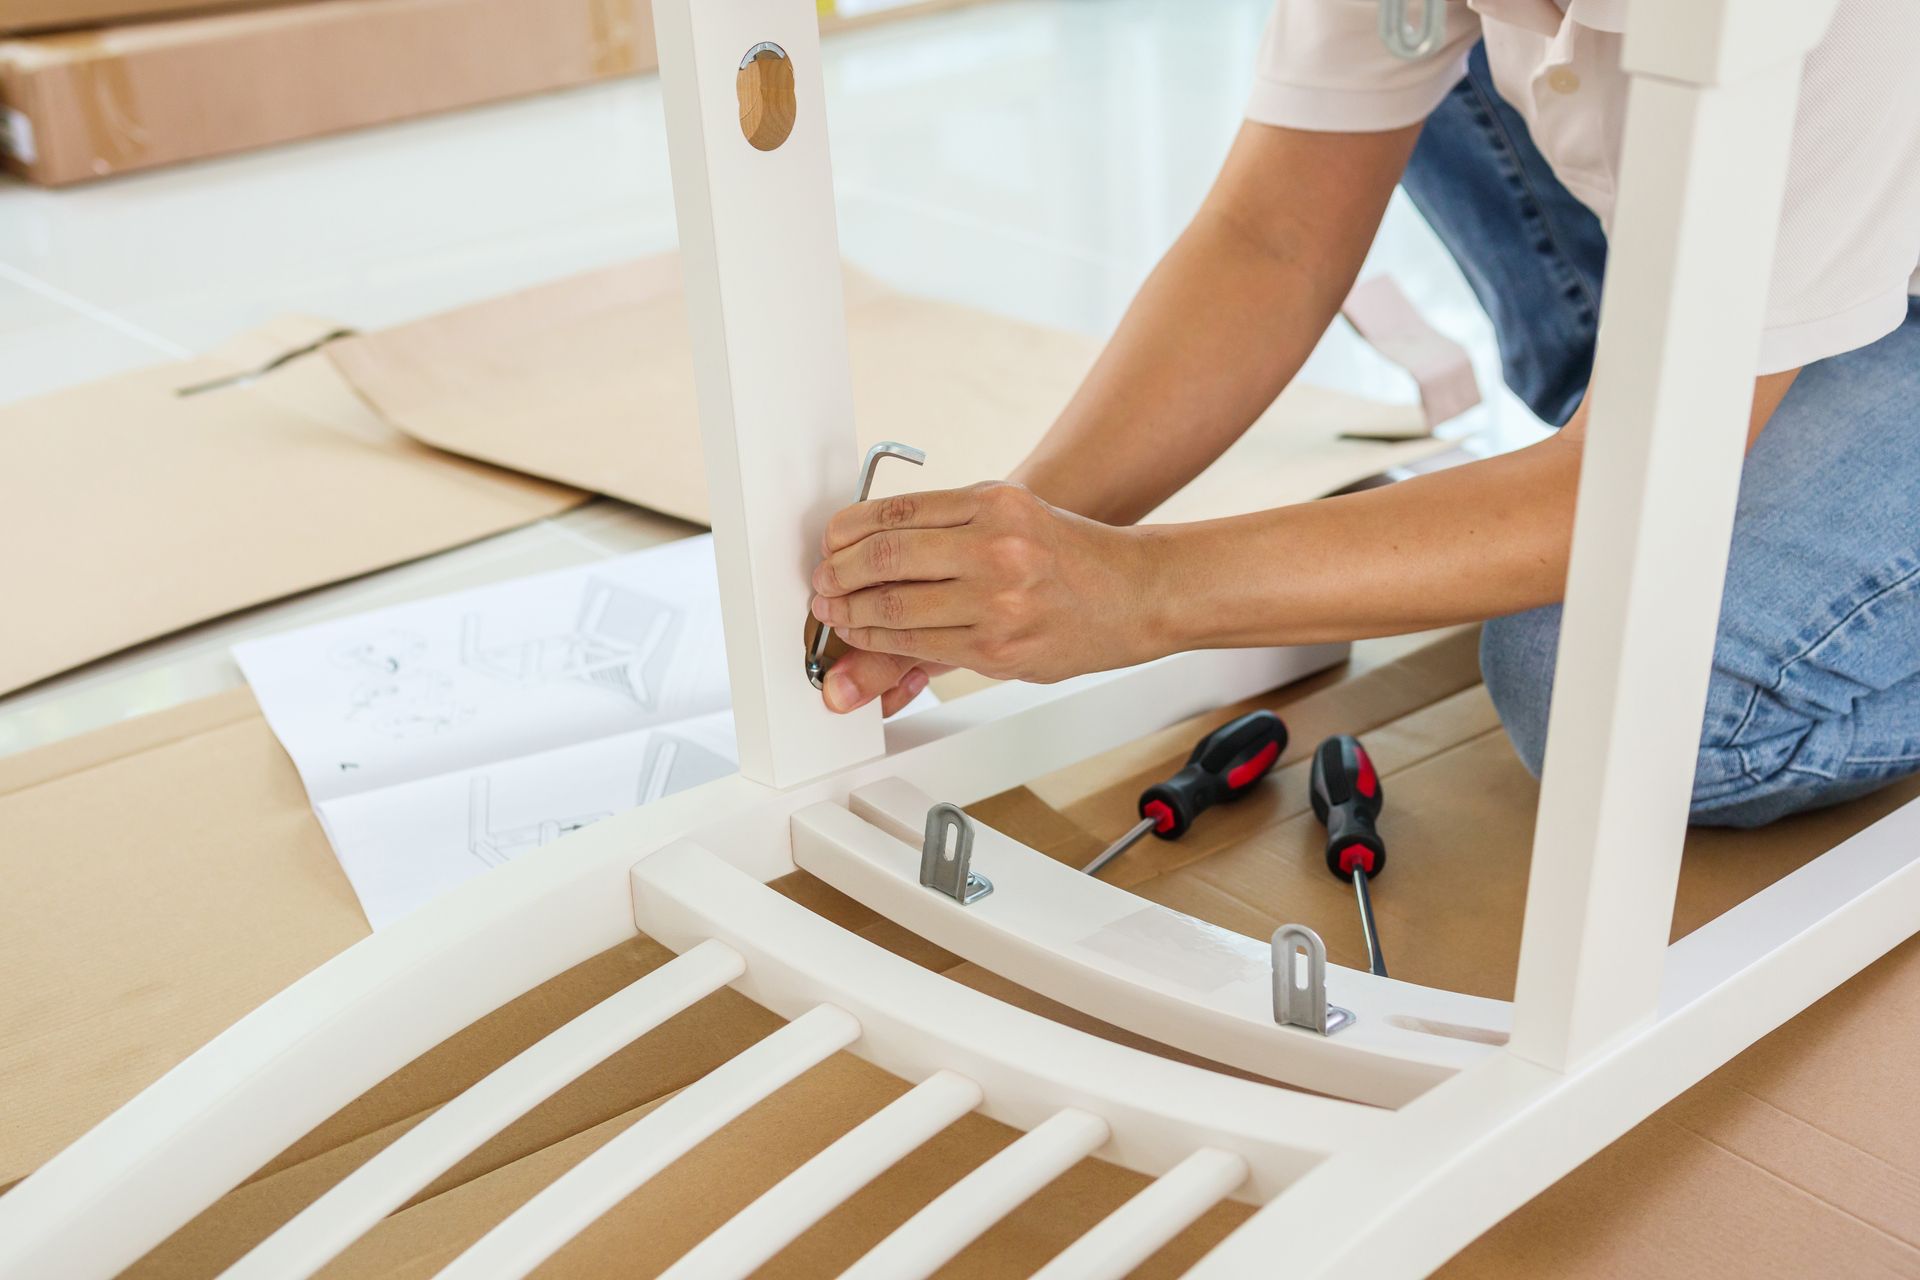 a woman is kneeling on the floor assembling a chair .